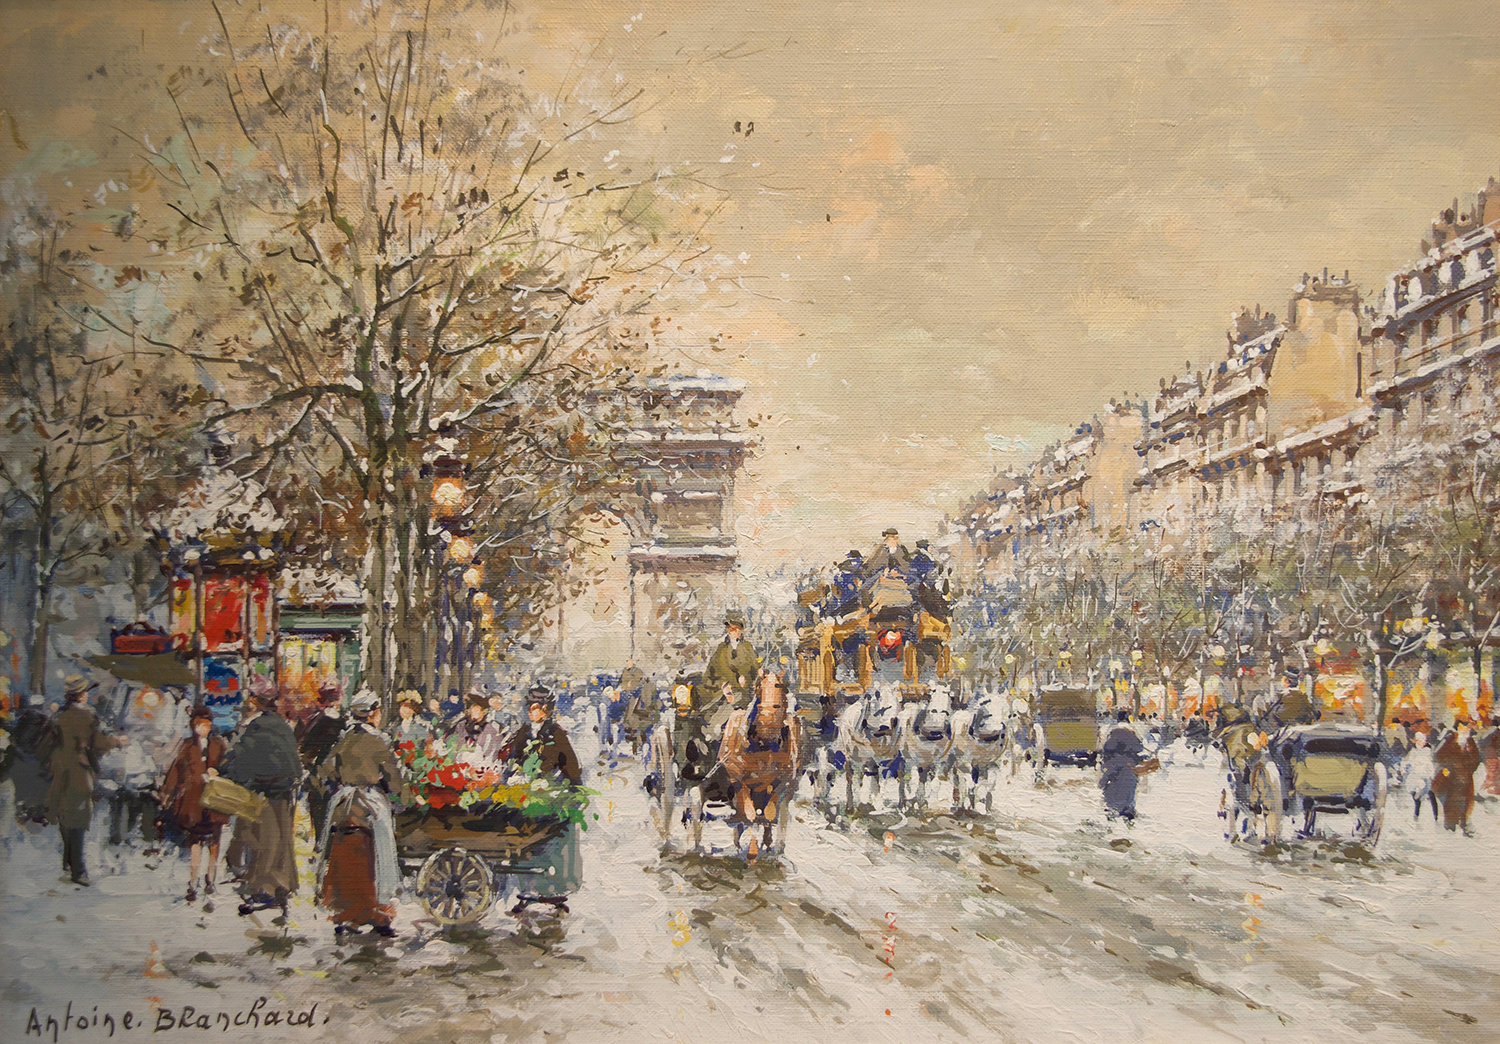 the arc de triomphe along the champs elysees in paris with people walking on the street and horses with carraiges and carts